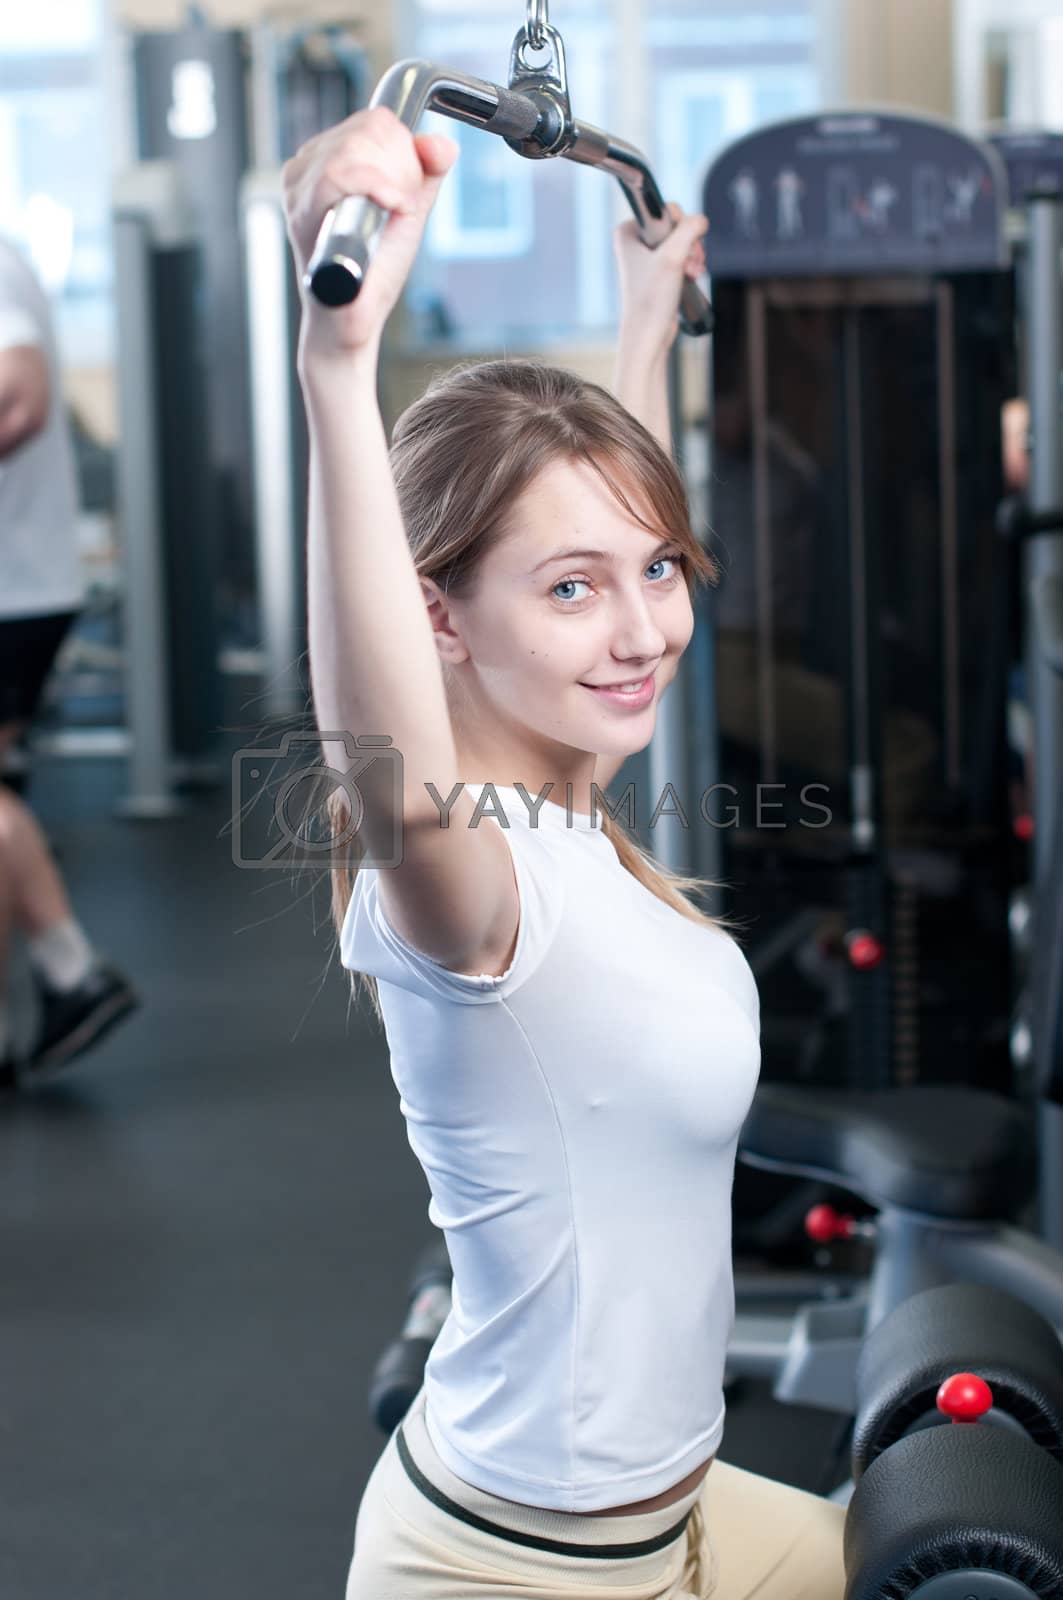 Royalty free image of Powerful casual woman lifting weights in gym by markin